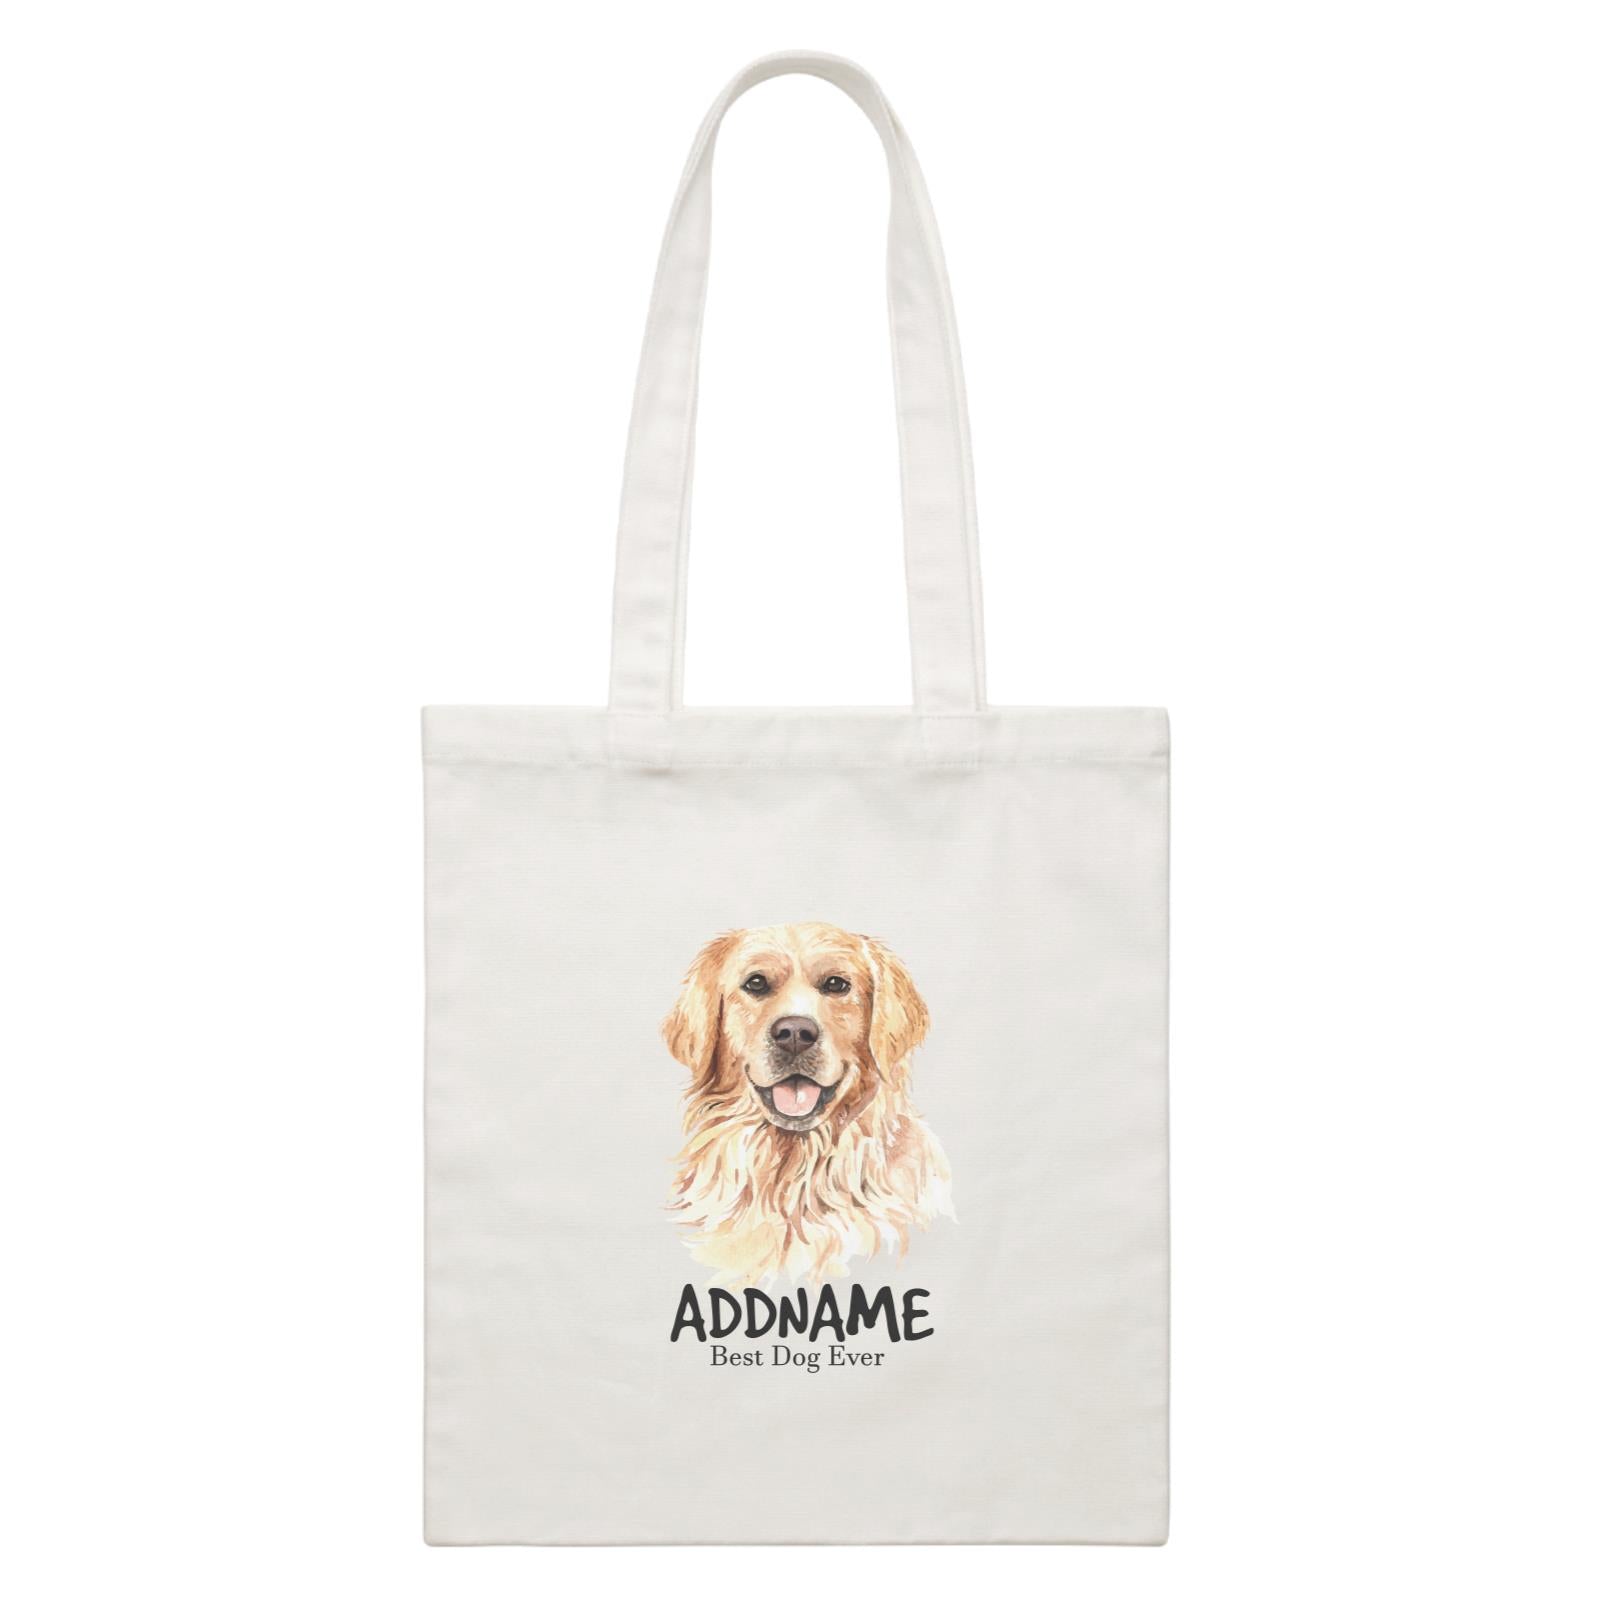 Watercolor Dog Golden Retriever Happy Best Dog Ever Addname White Canvas Bag